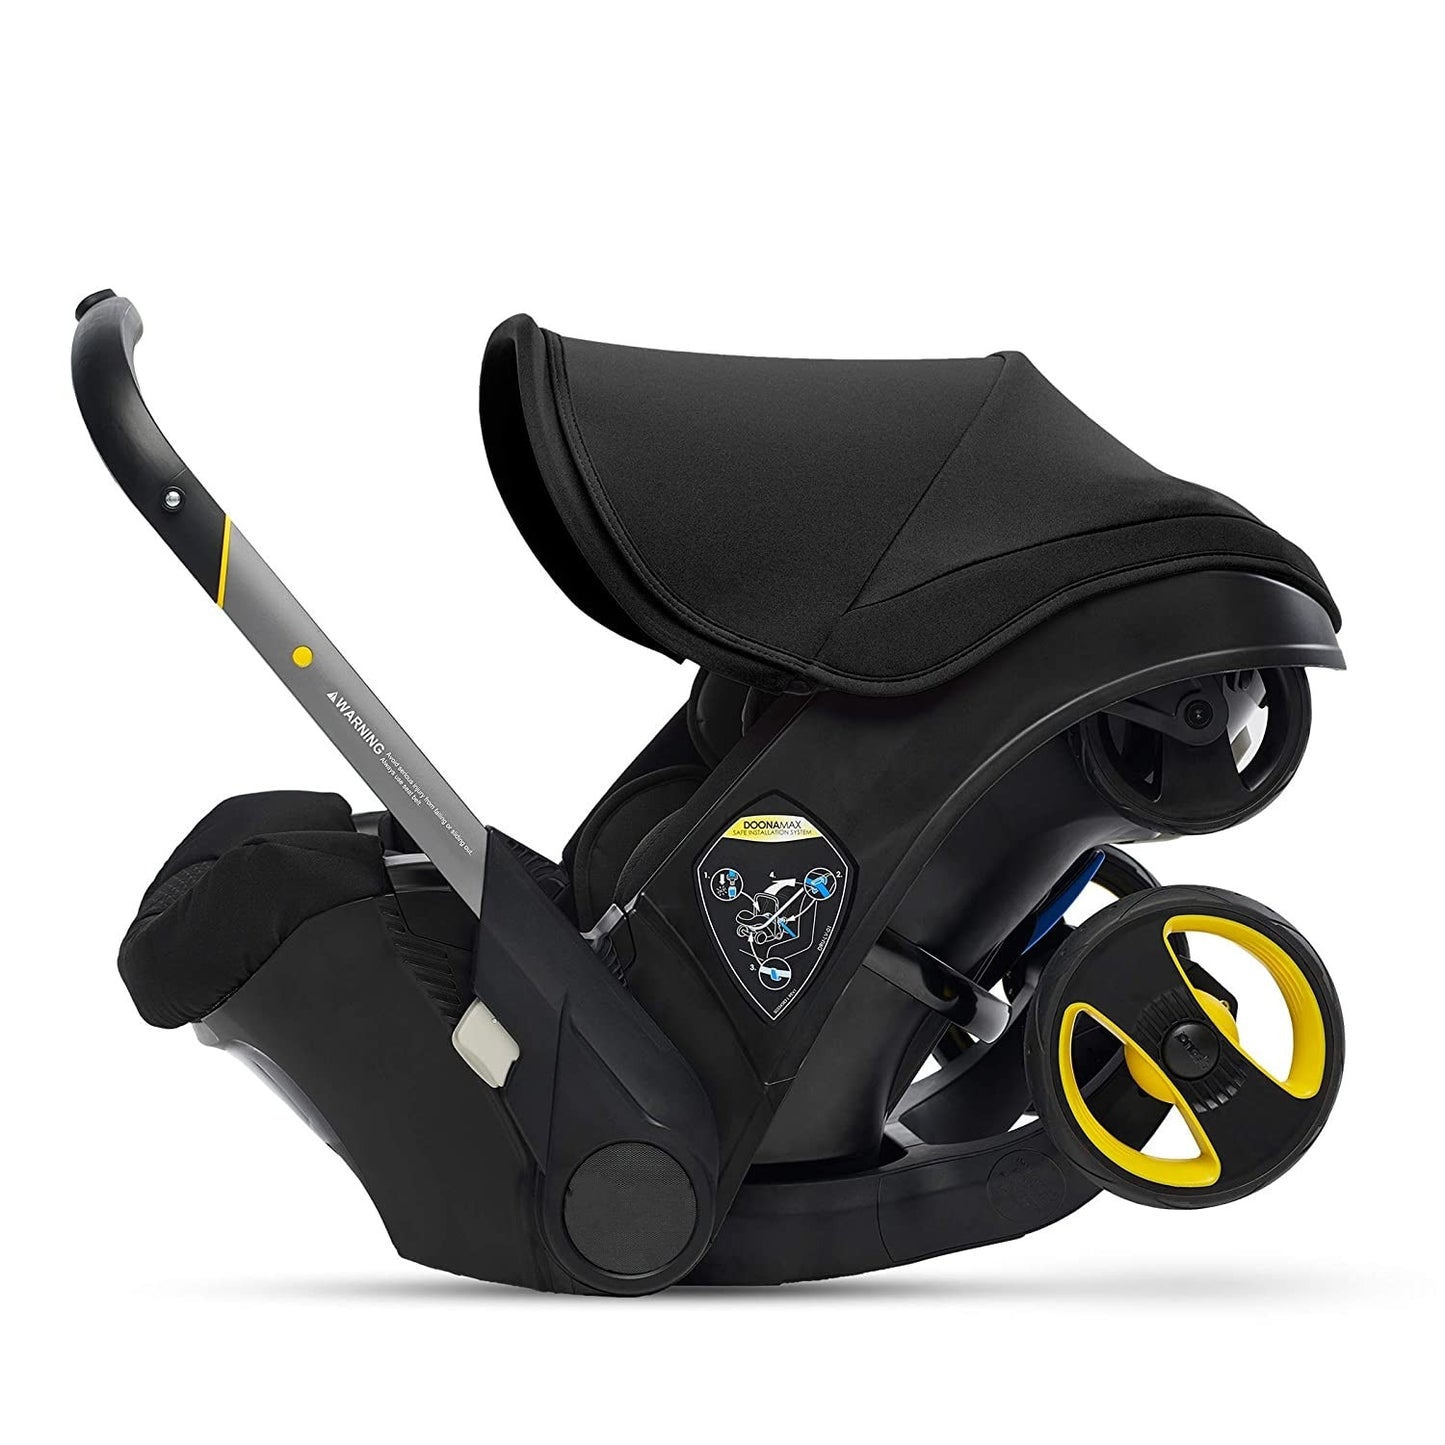 Baby Stroller 3 in 1 With Car Seat